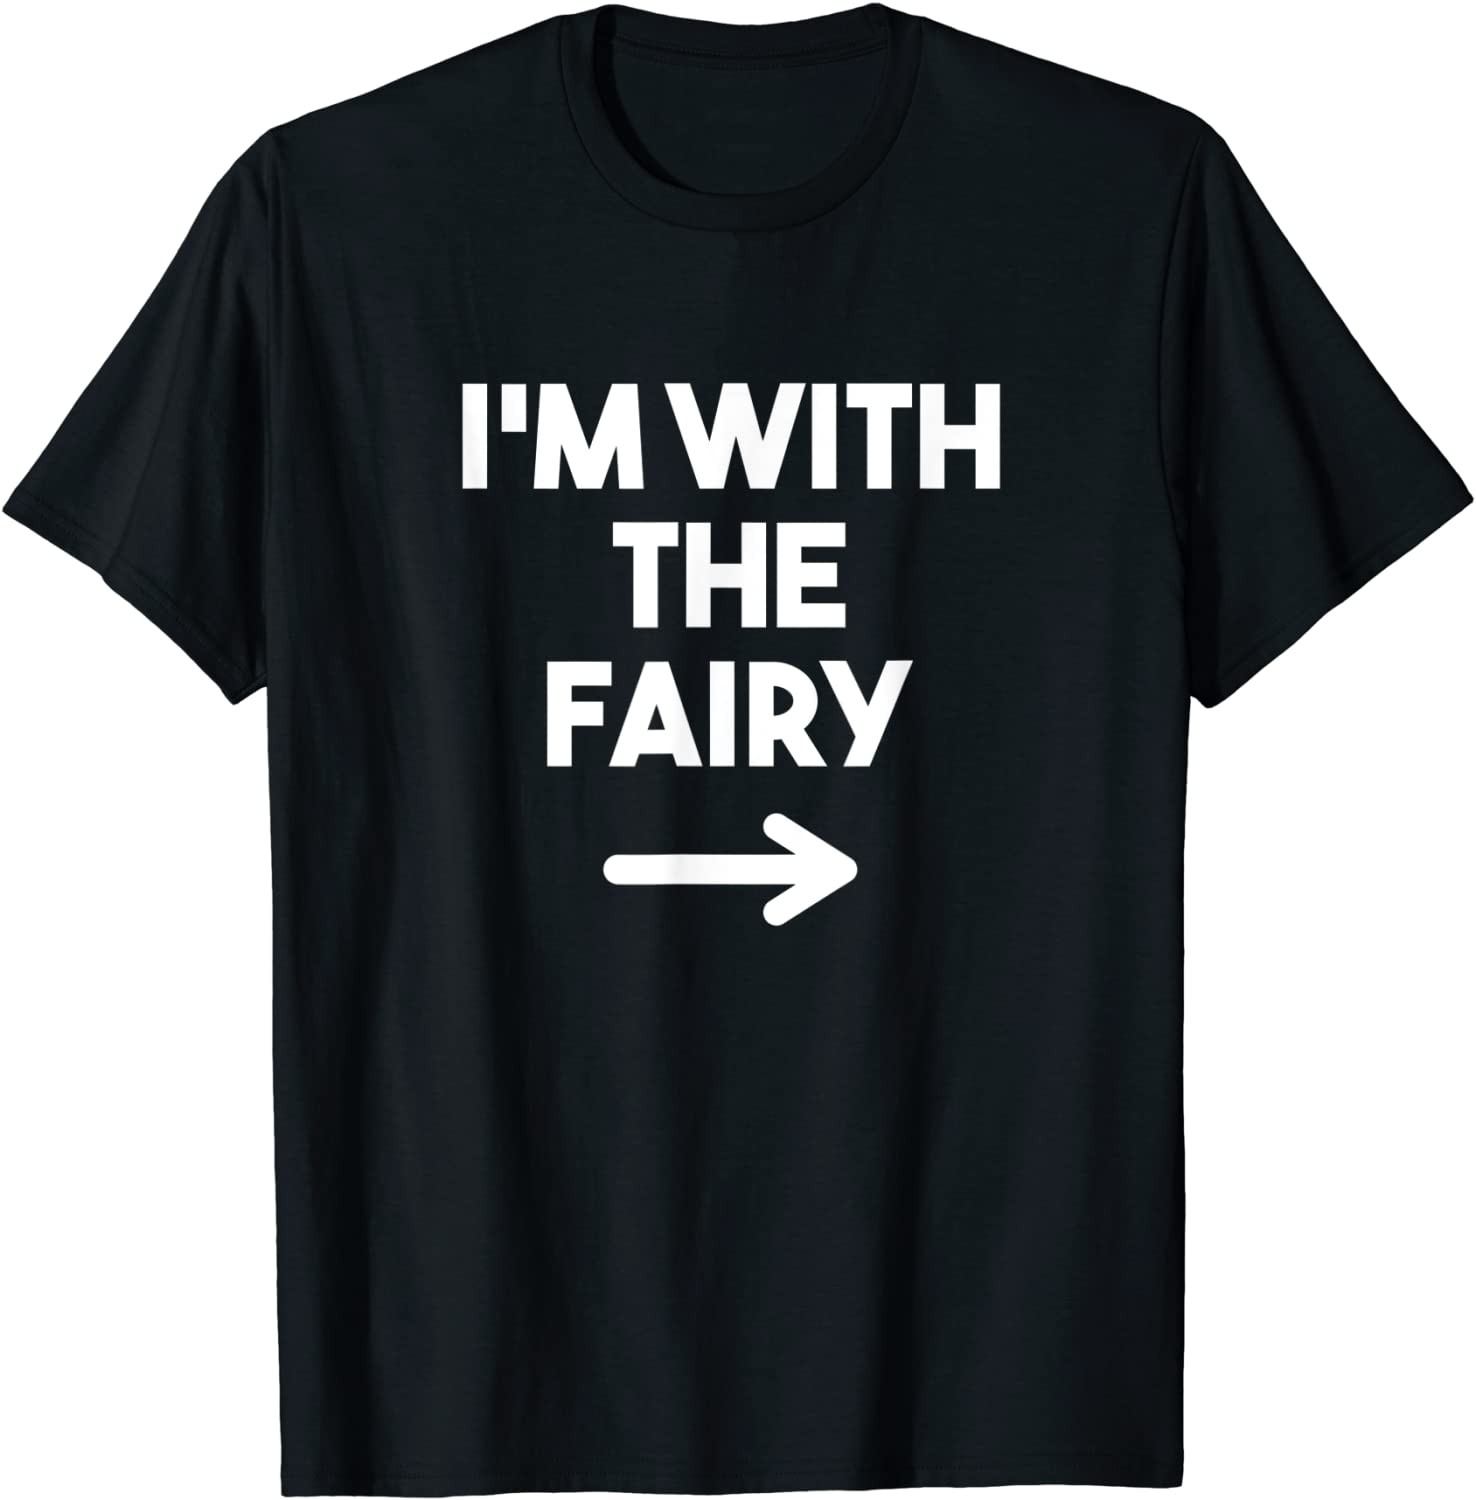 I'm With The Fairy Couples Halloween Party Costume T-Shirt